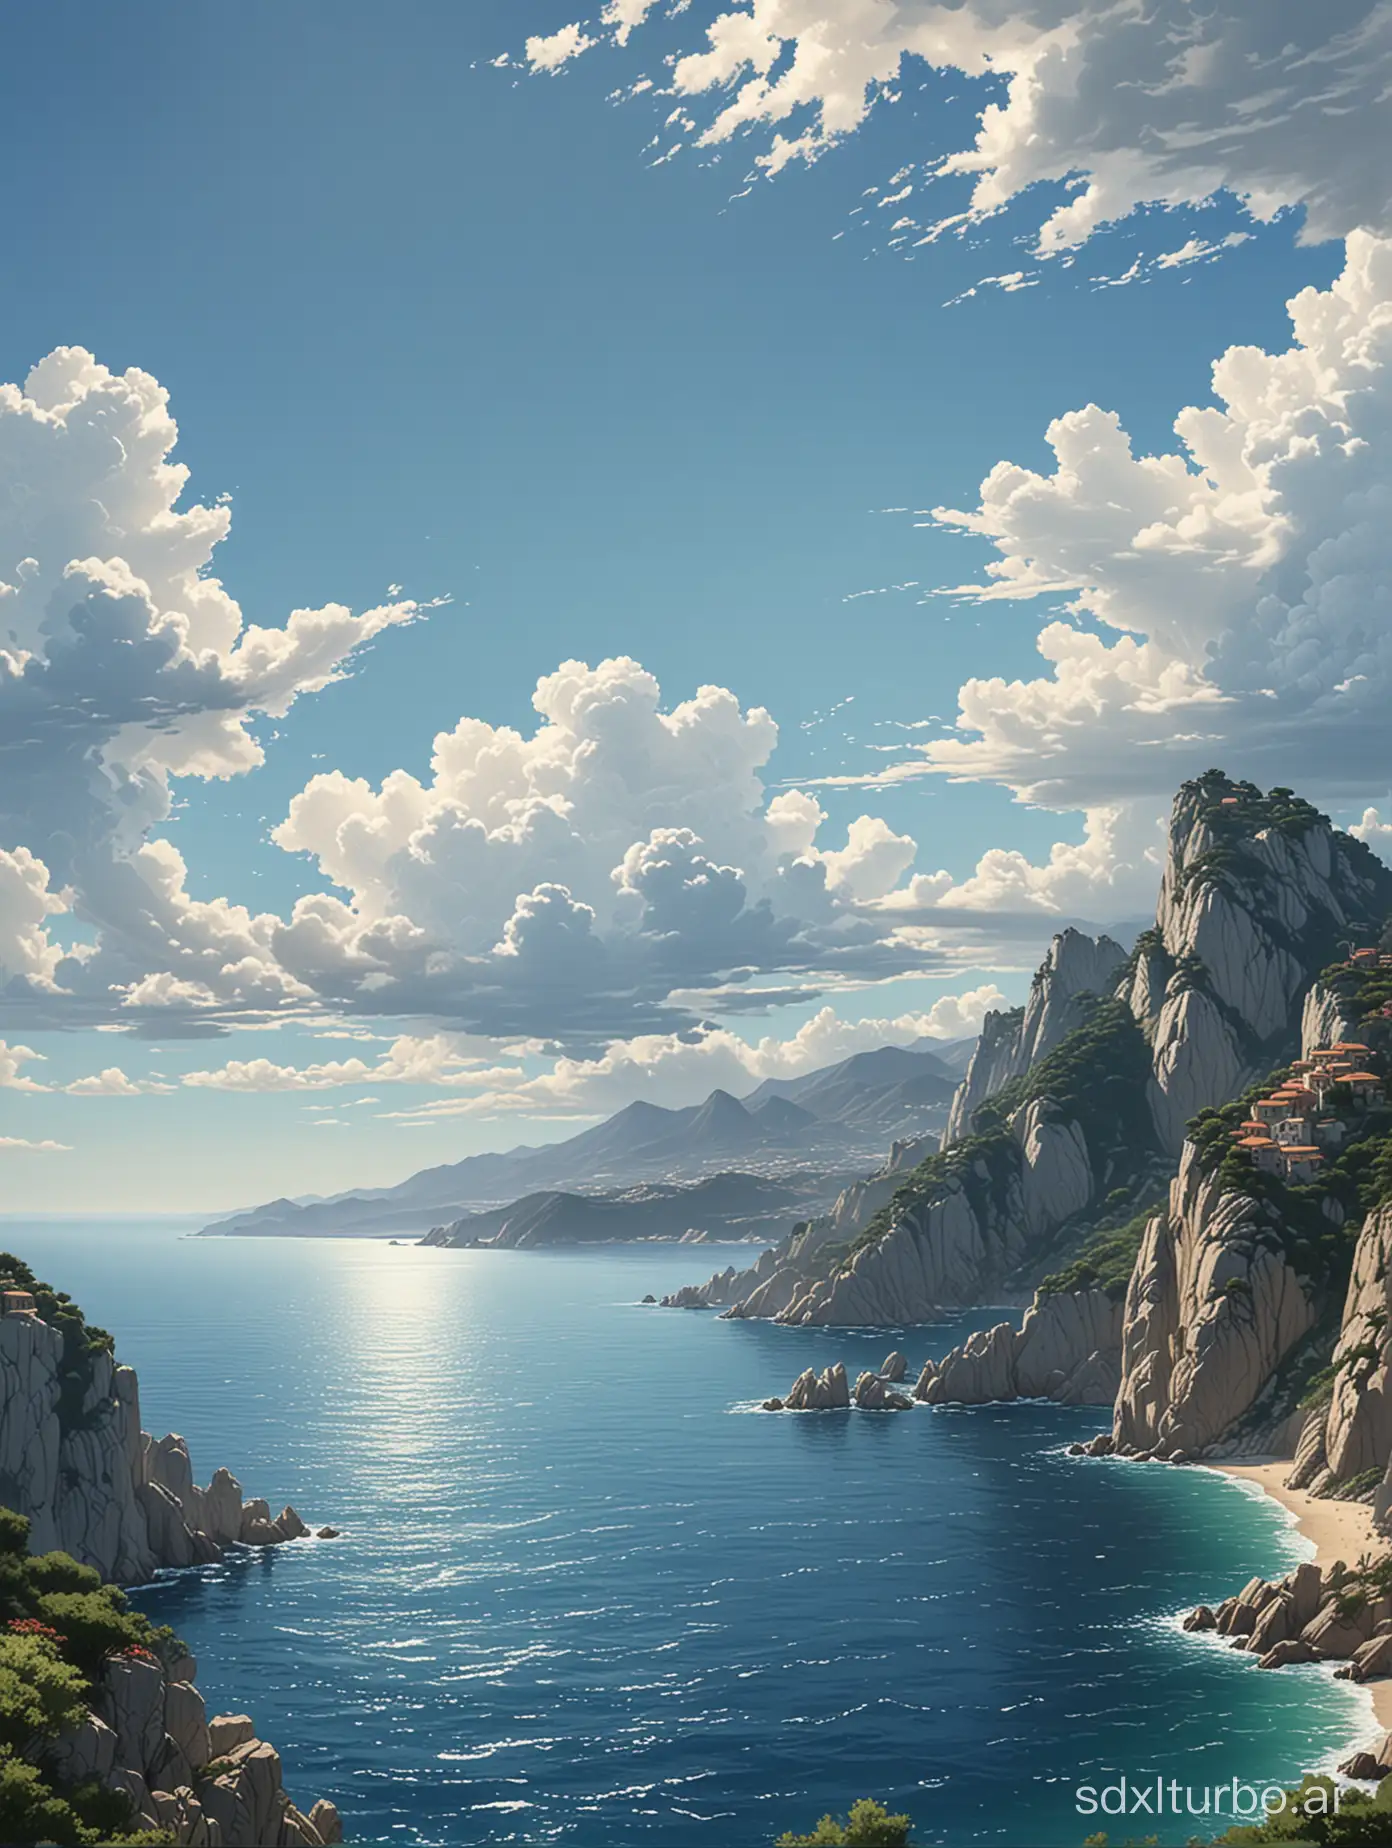 Mediterranean mountains with sea. The sea is only slightly visible to the right. Studio Ghibli style. Distant View ,blue sky, fluffy white clouds